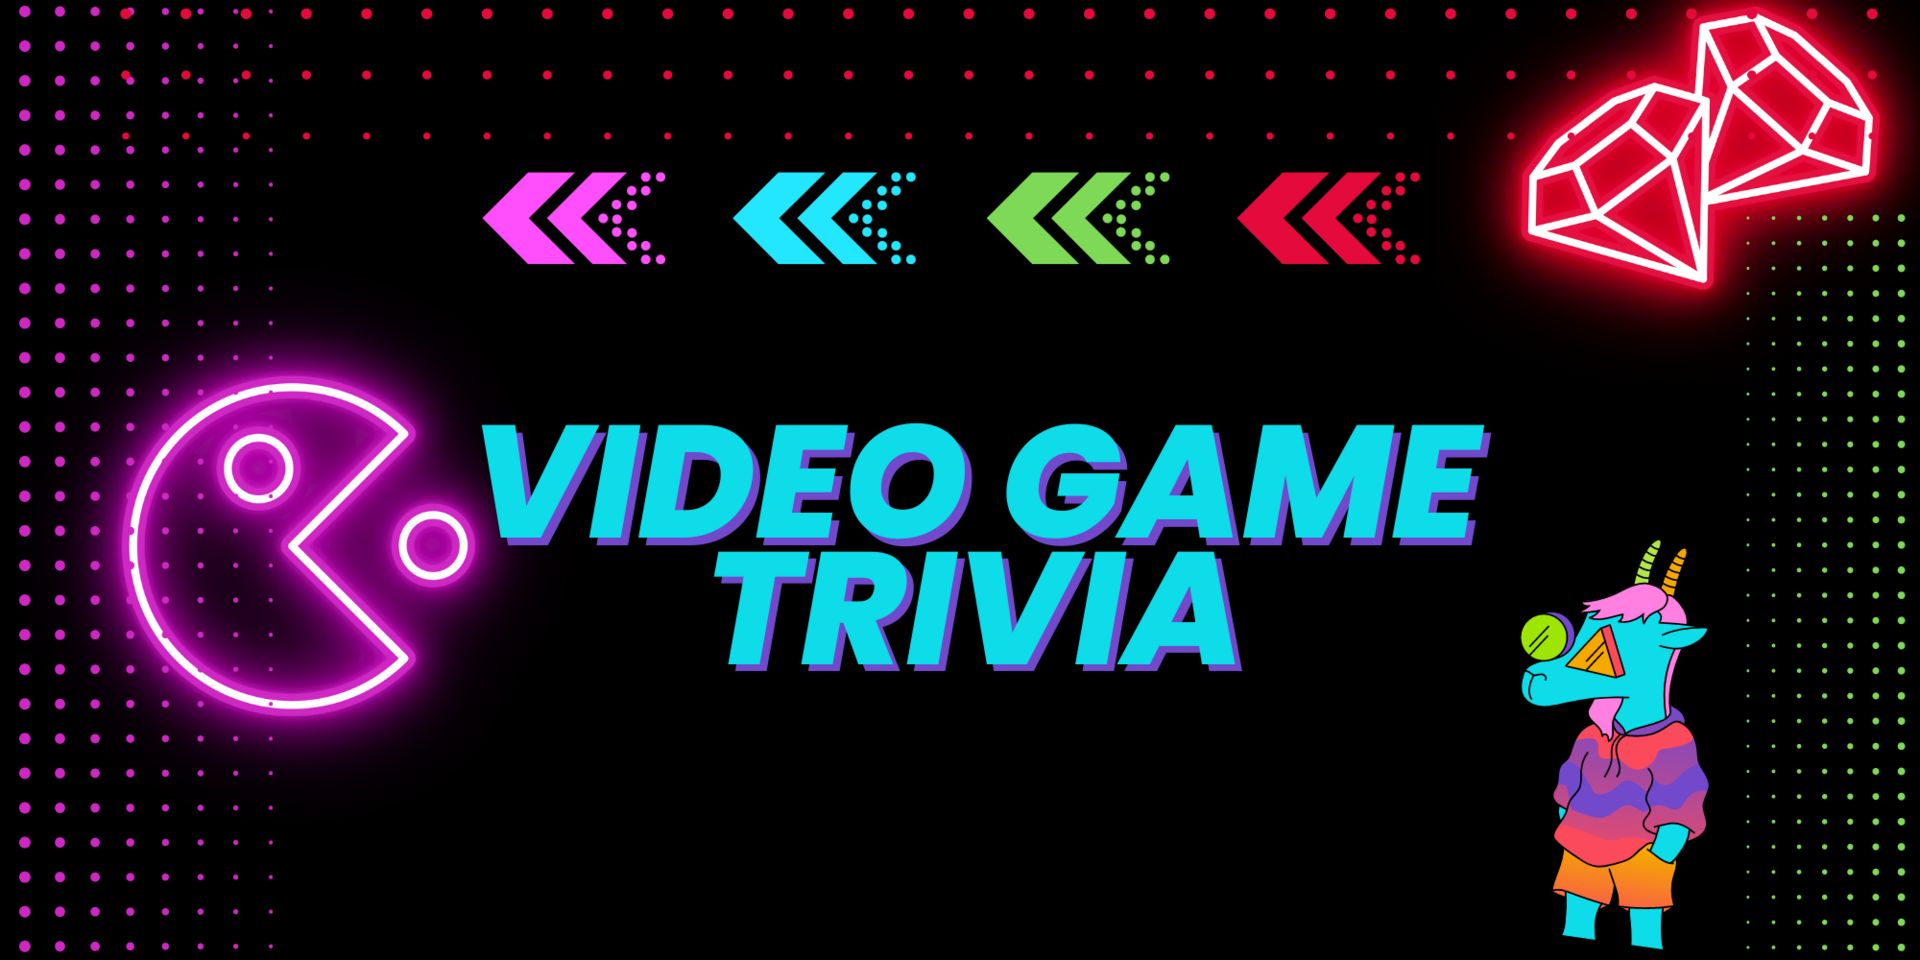 Trivia Tuesday: Video Games, Vancouver, British Columbia, Canada